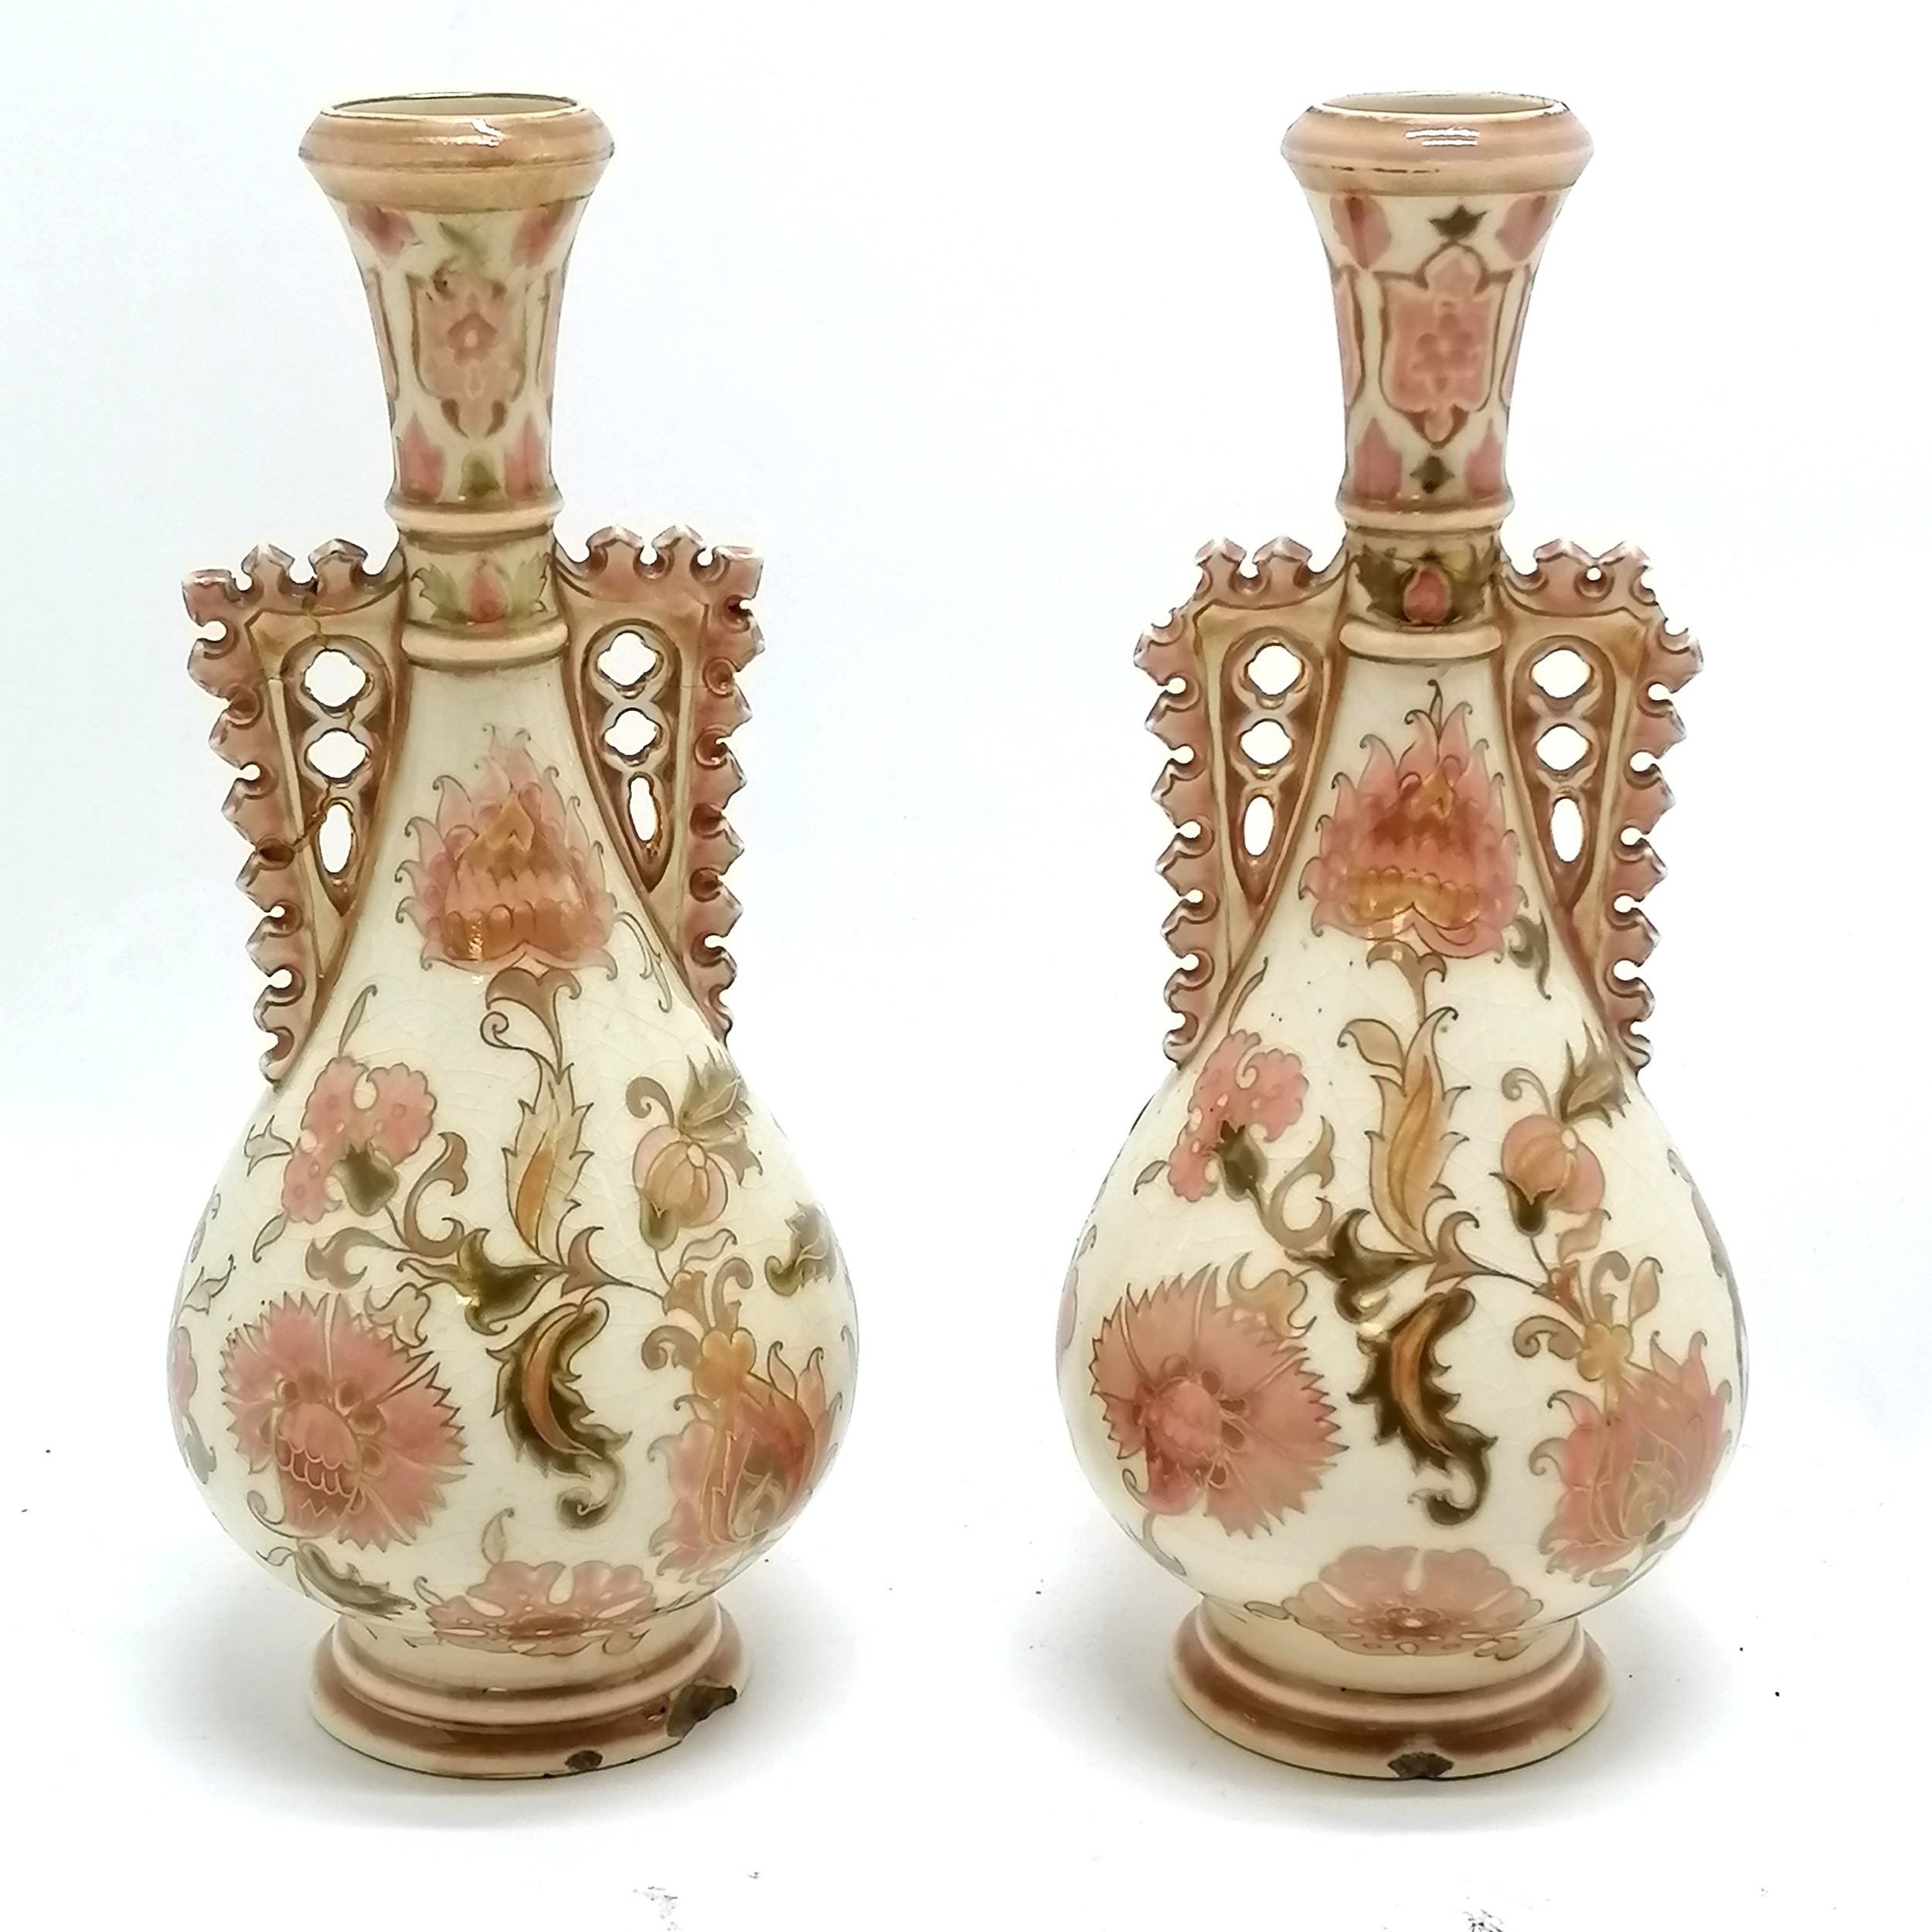 Zsolnay (Pecs, Hungary) pair of decorative vases - 21cm high & both are a/f - Image 8 of 8